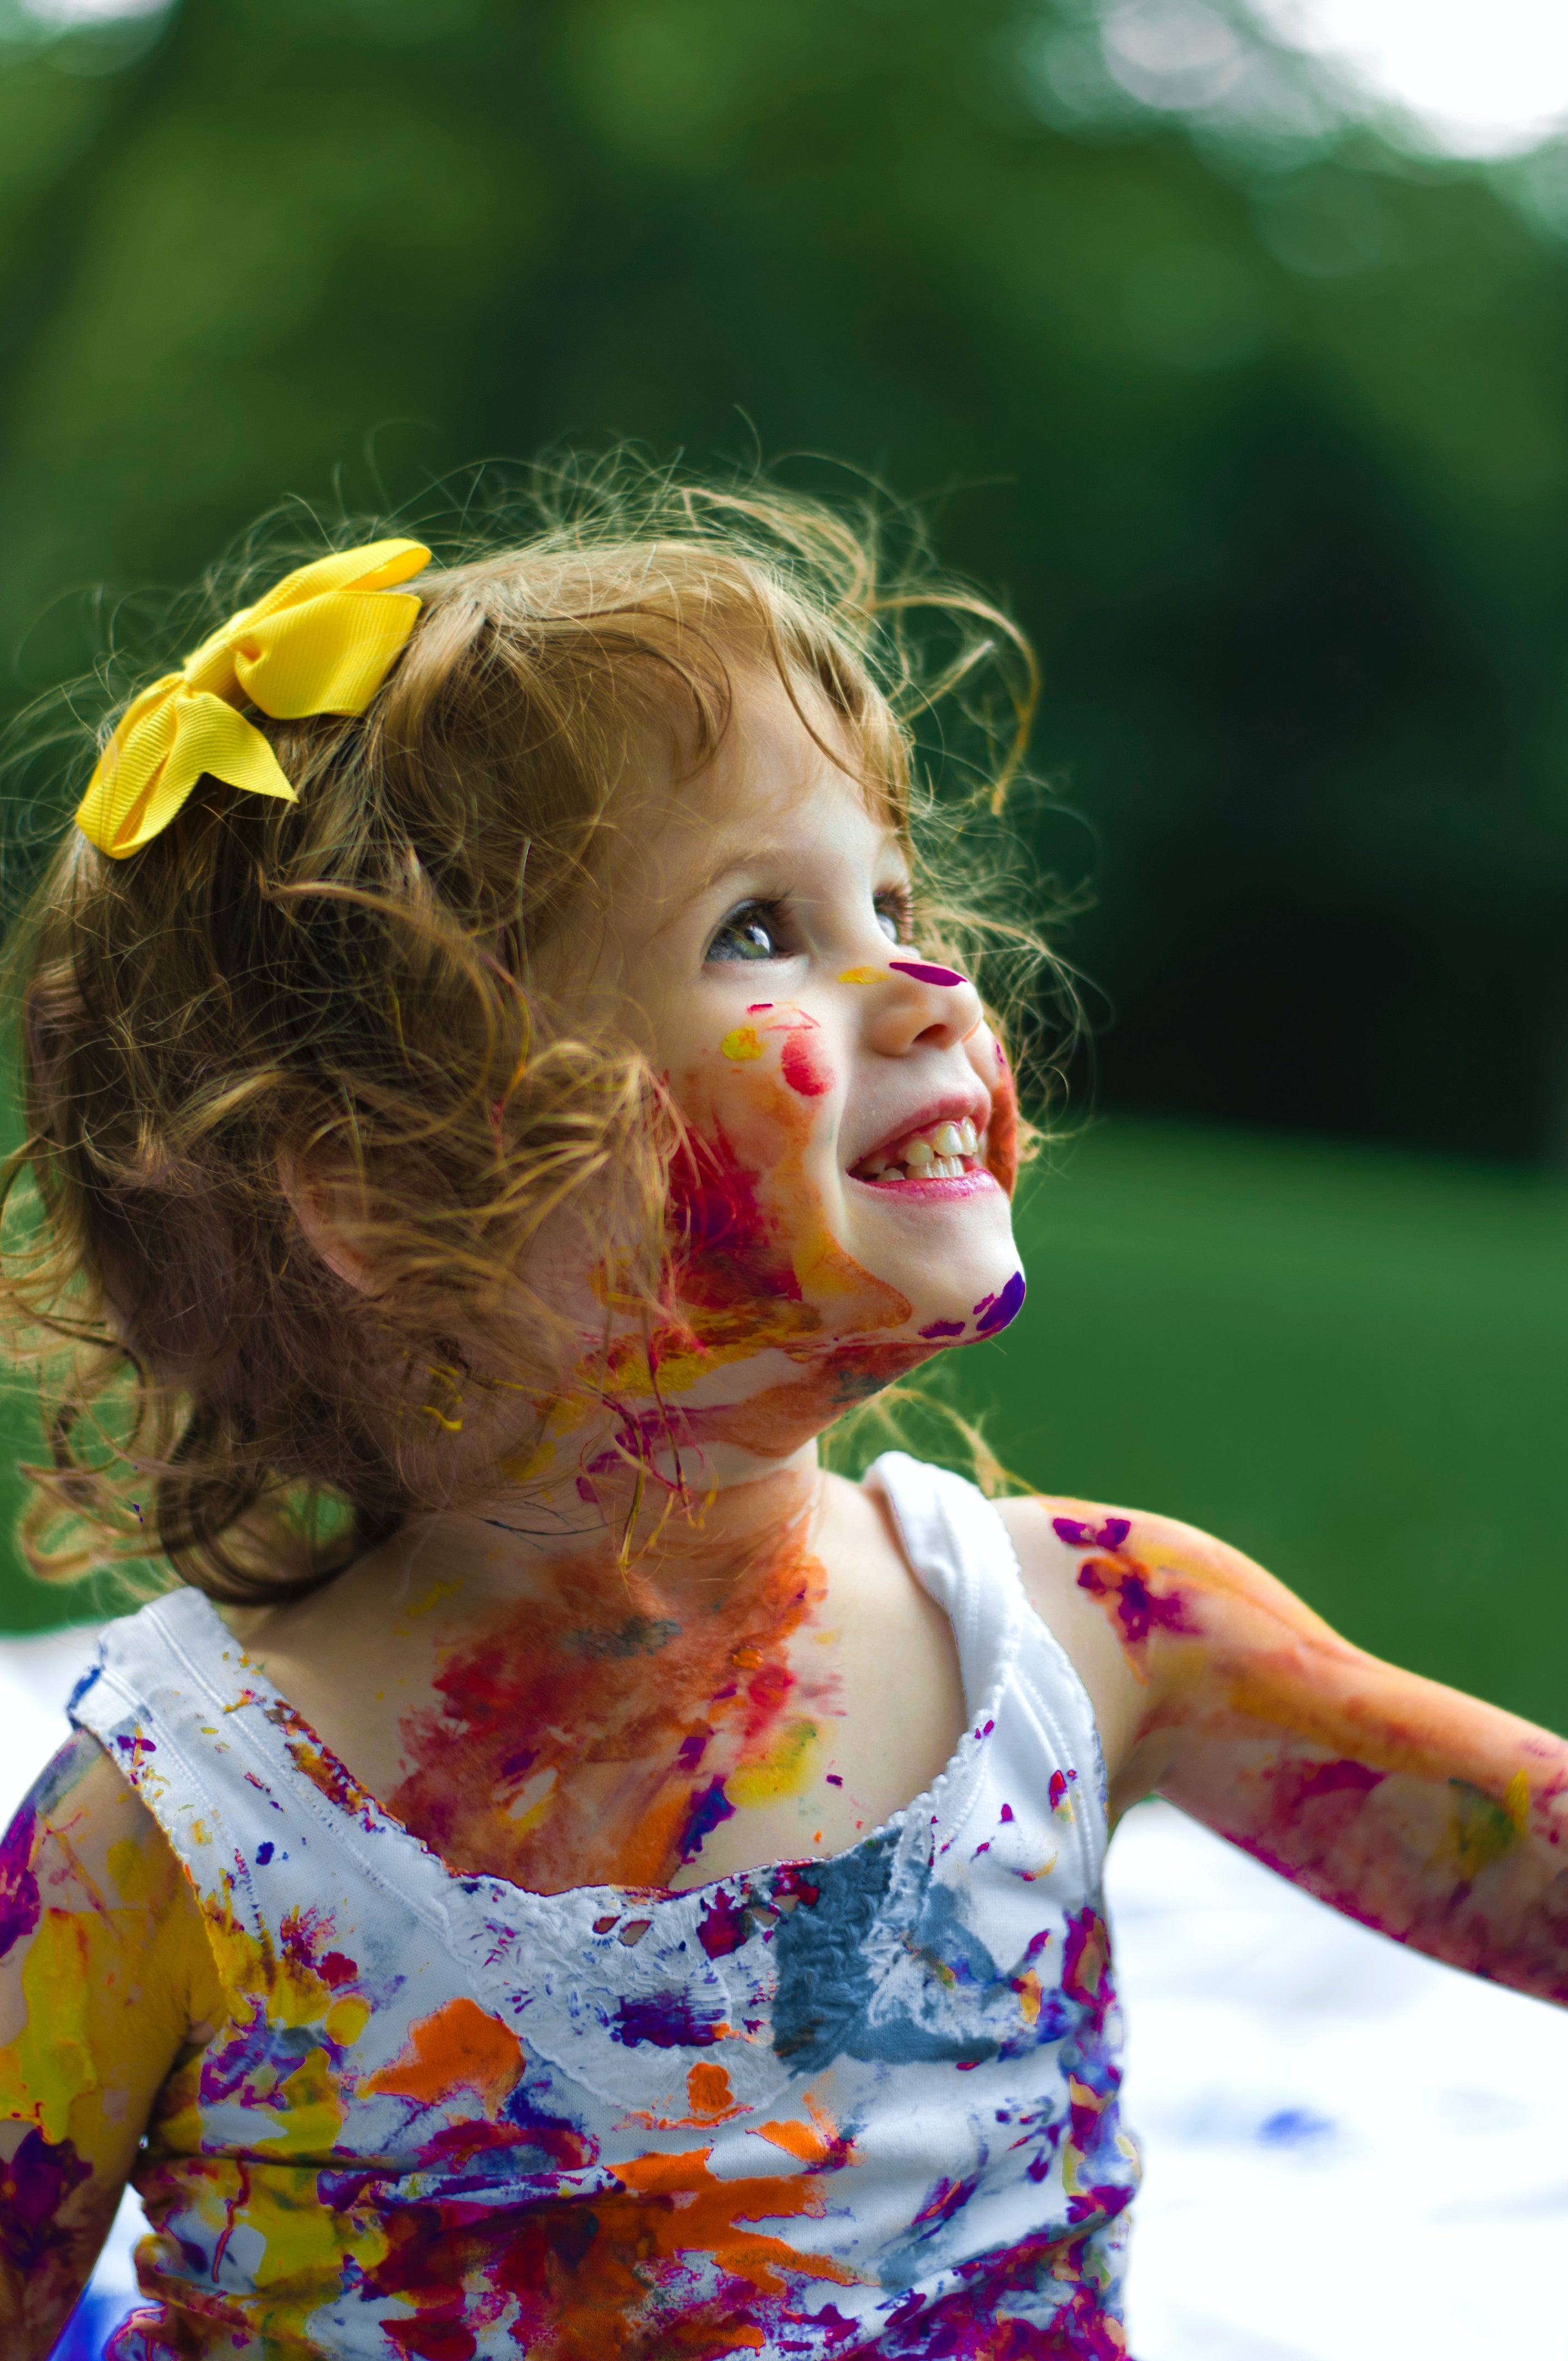 Little girl covered in paint picture by Senjuti Kundu